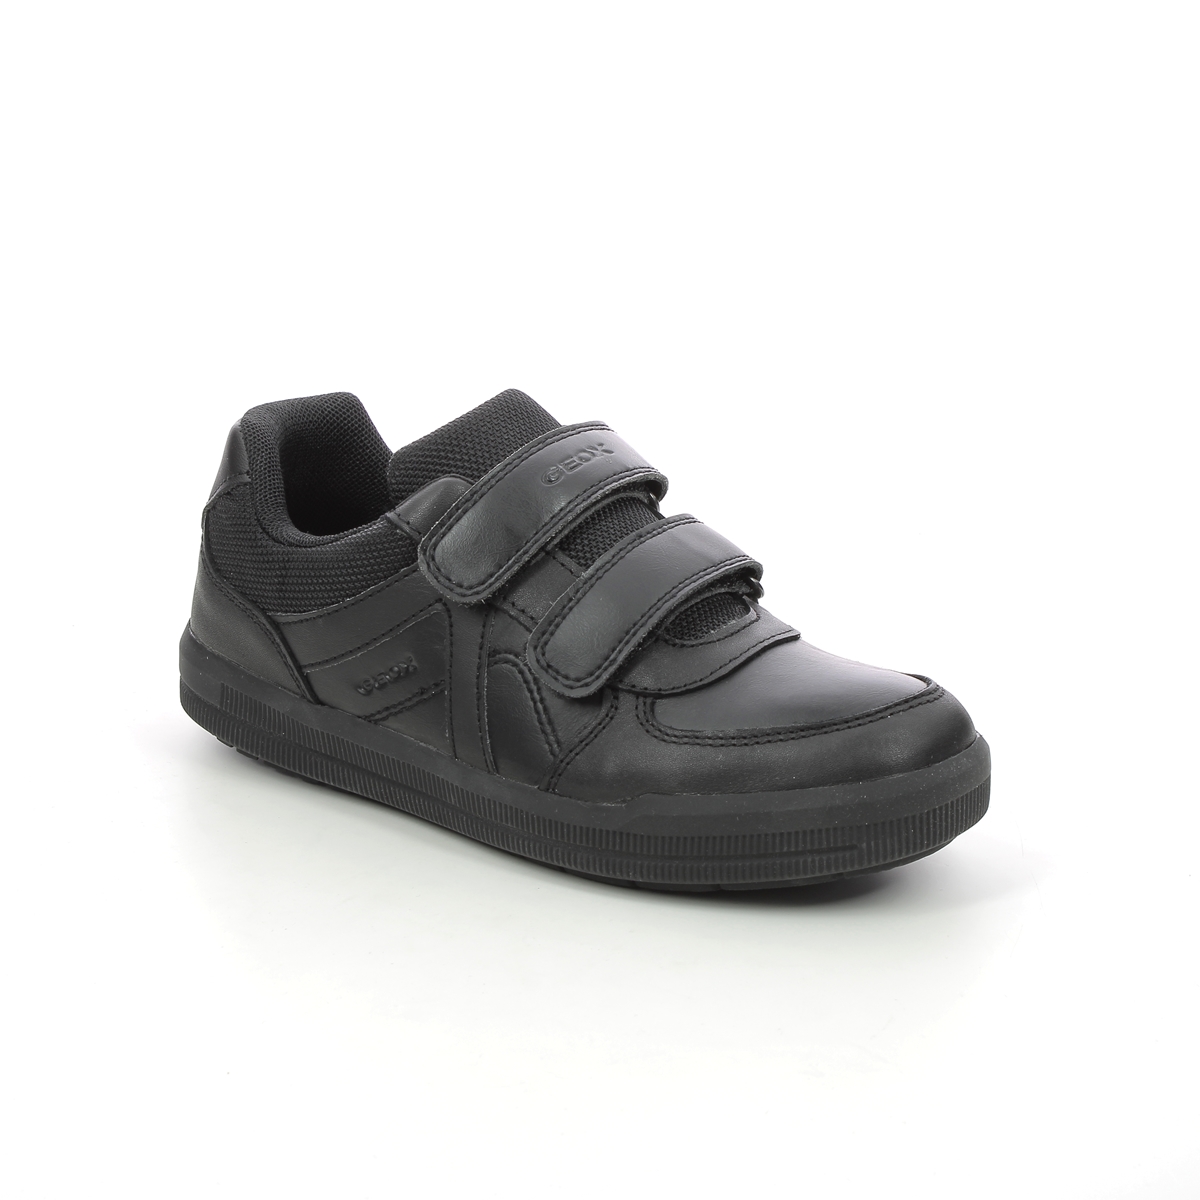 Geox - Arzach Boy Vel (Black Leather) J844Ae-C9999 In Size 33 In Plain Black Leather For School For kids